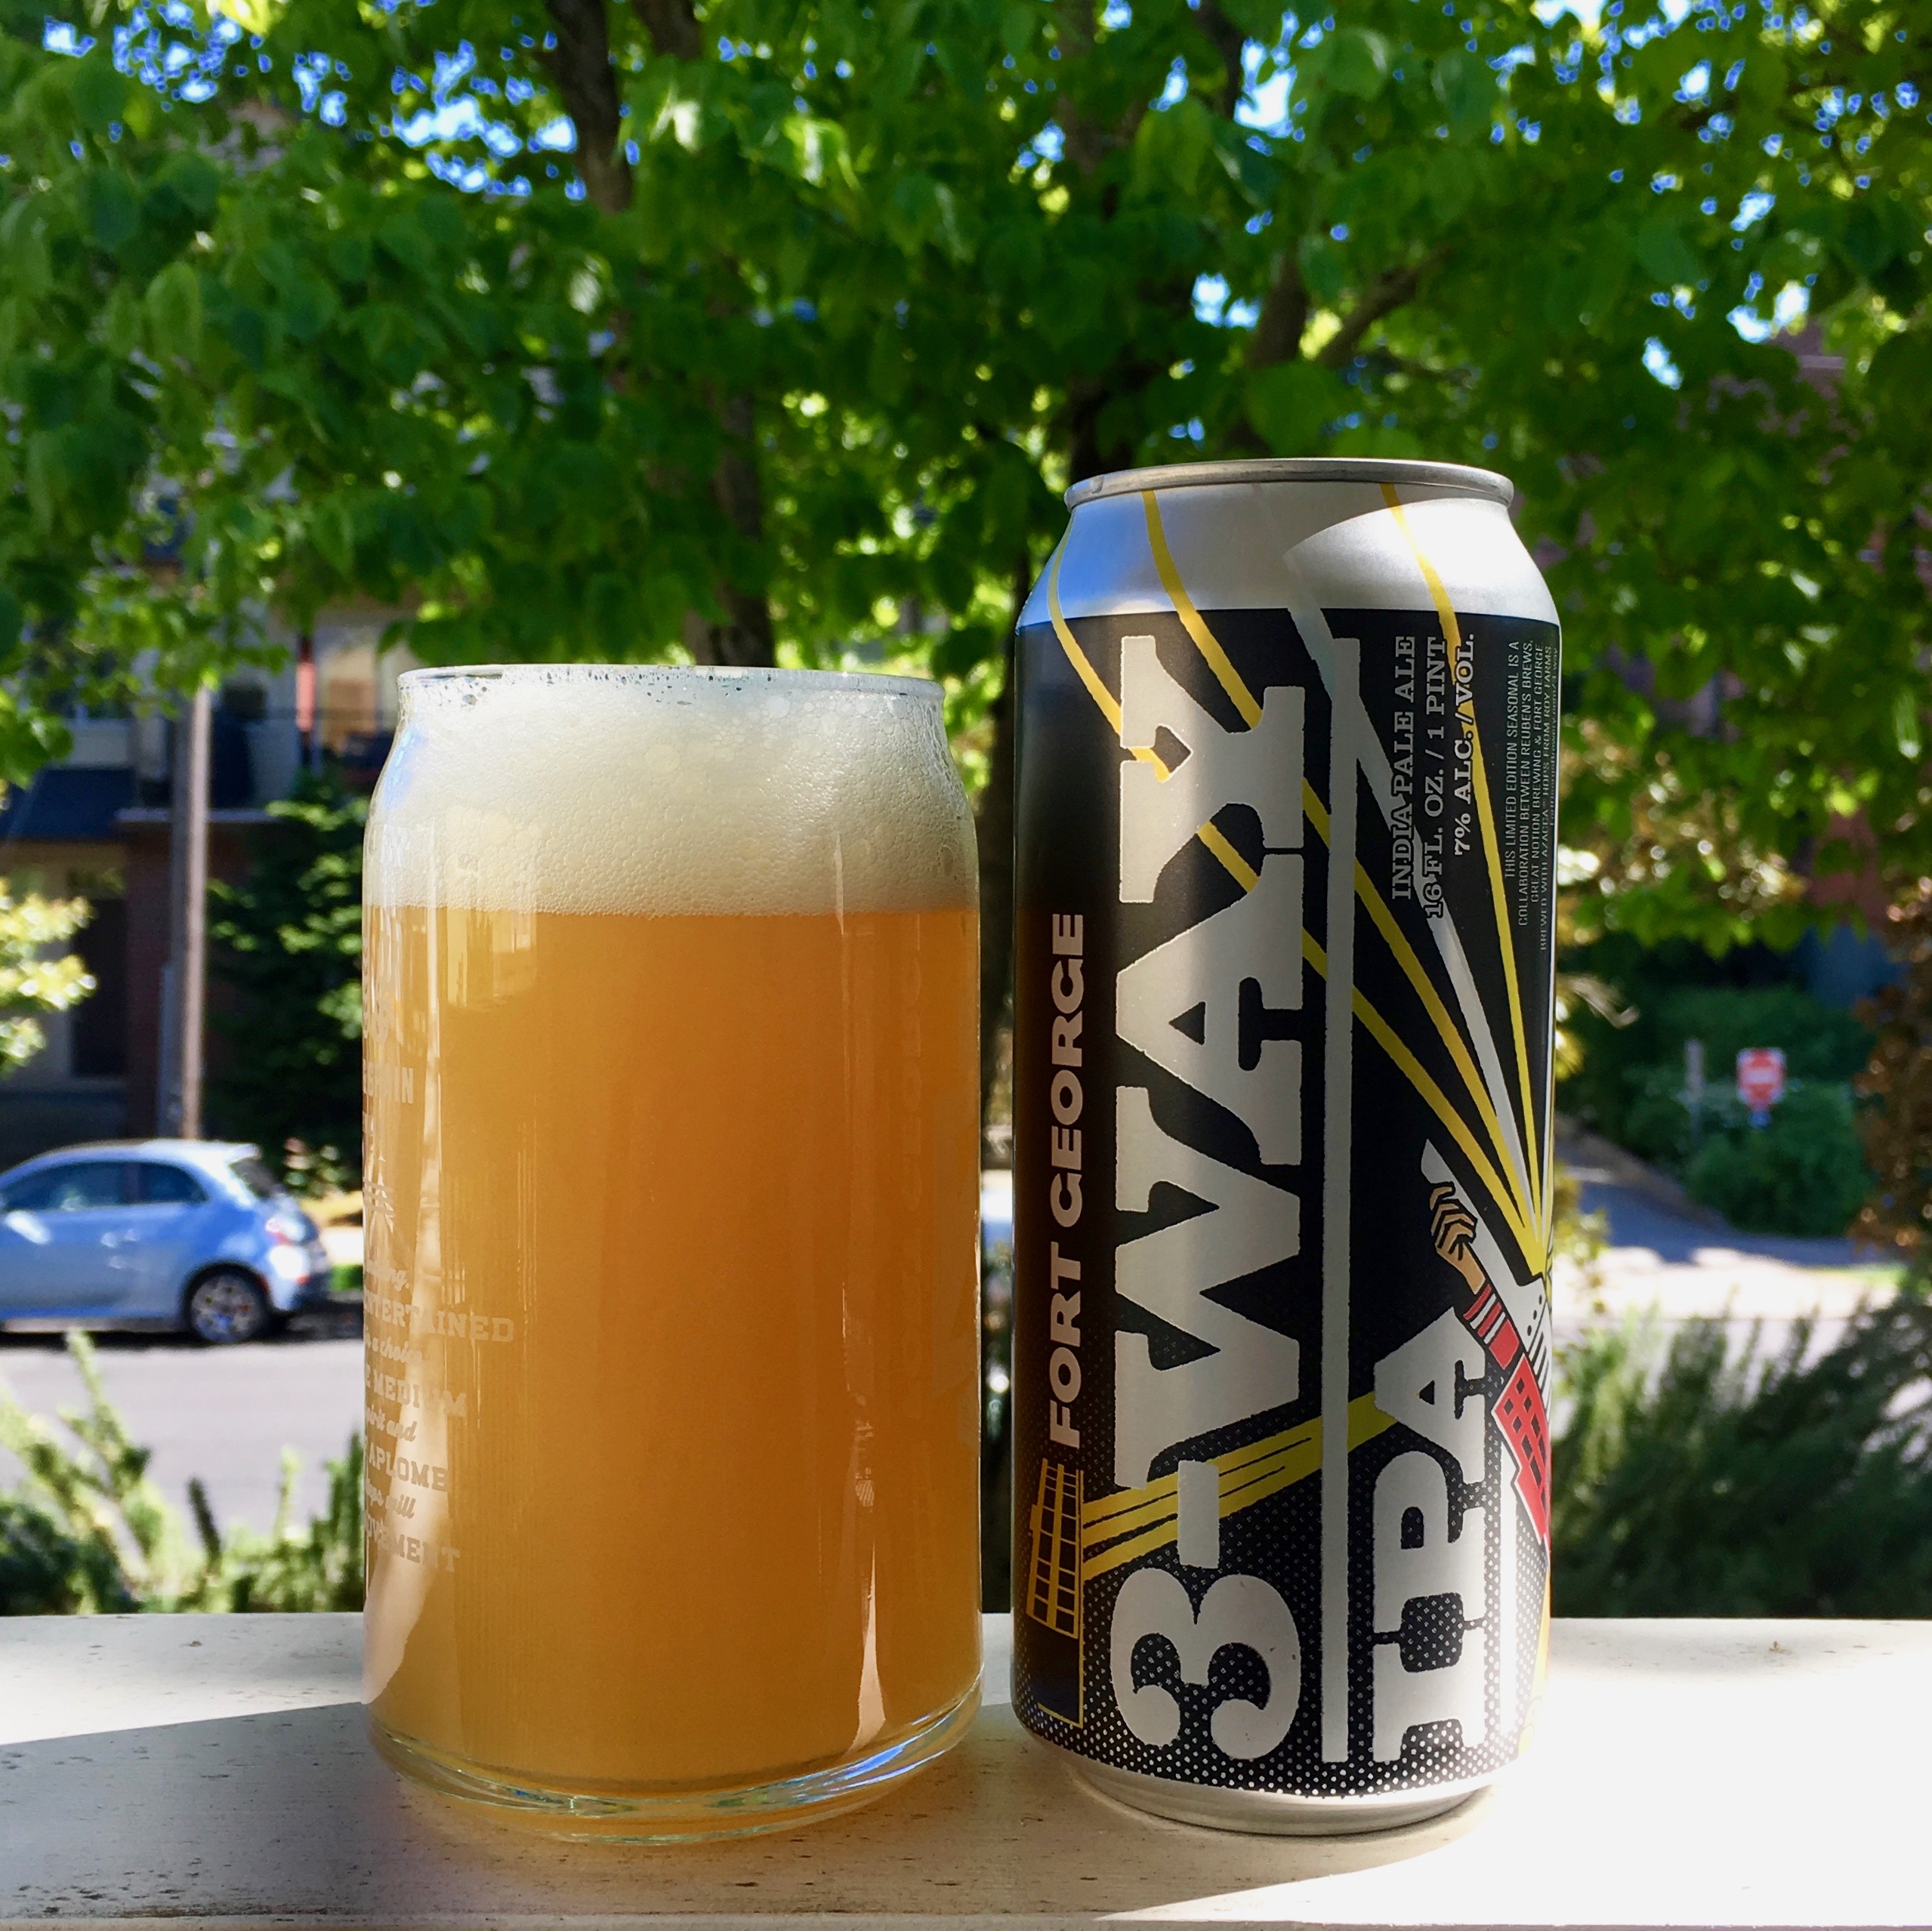 A freshly canned Fort George 3-Way IPA that was brewed in collaboration with Reuben's Brews and Great Notion Brewing.